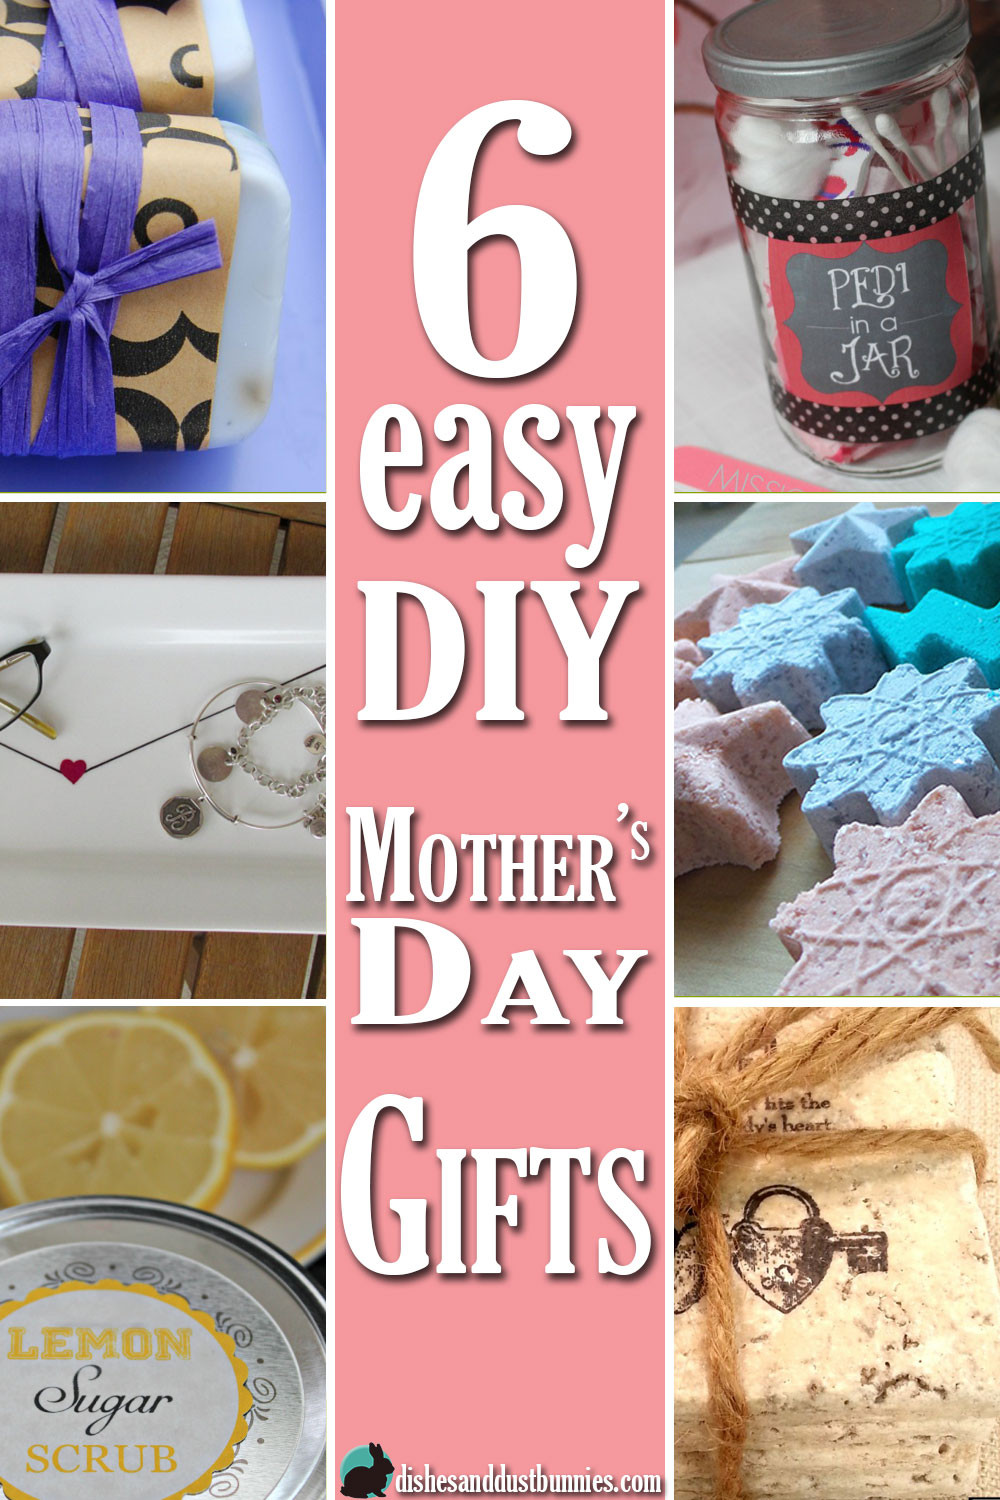 Easy Diy Mother's Day Gifts
 6 Easy DIY Mother s Day Gifts Dishes and Dust Bunnies